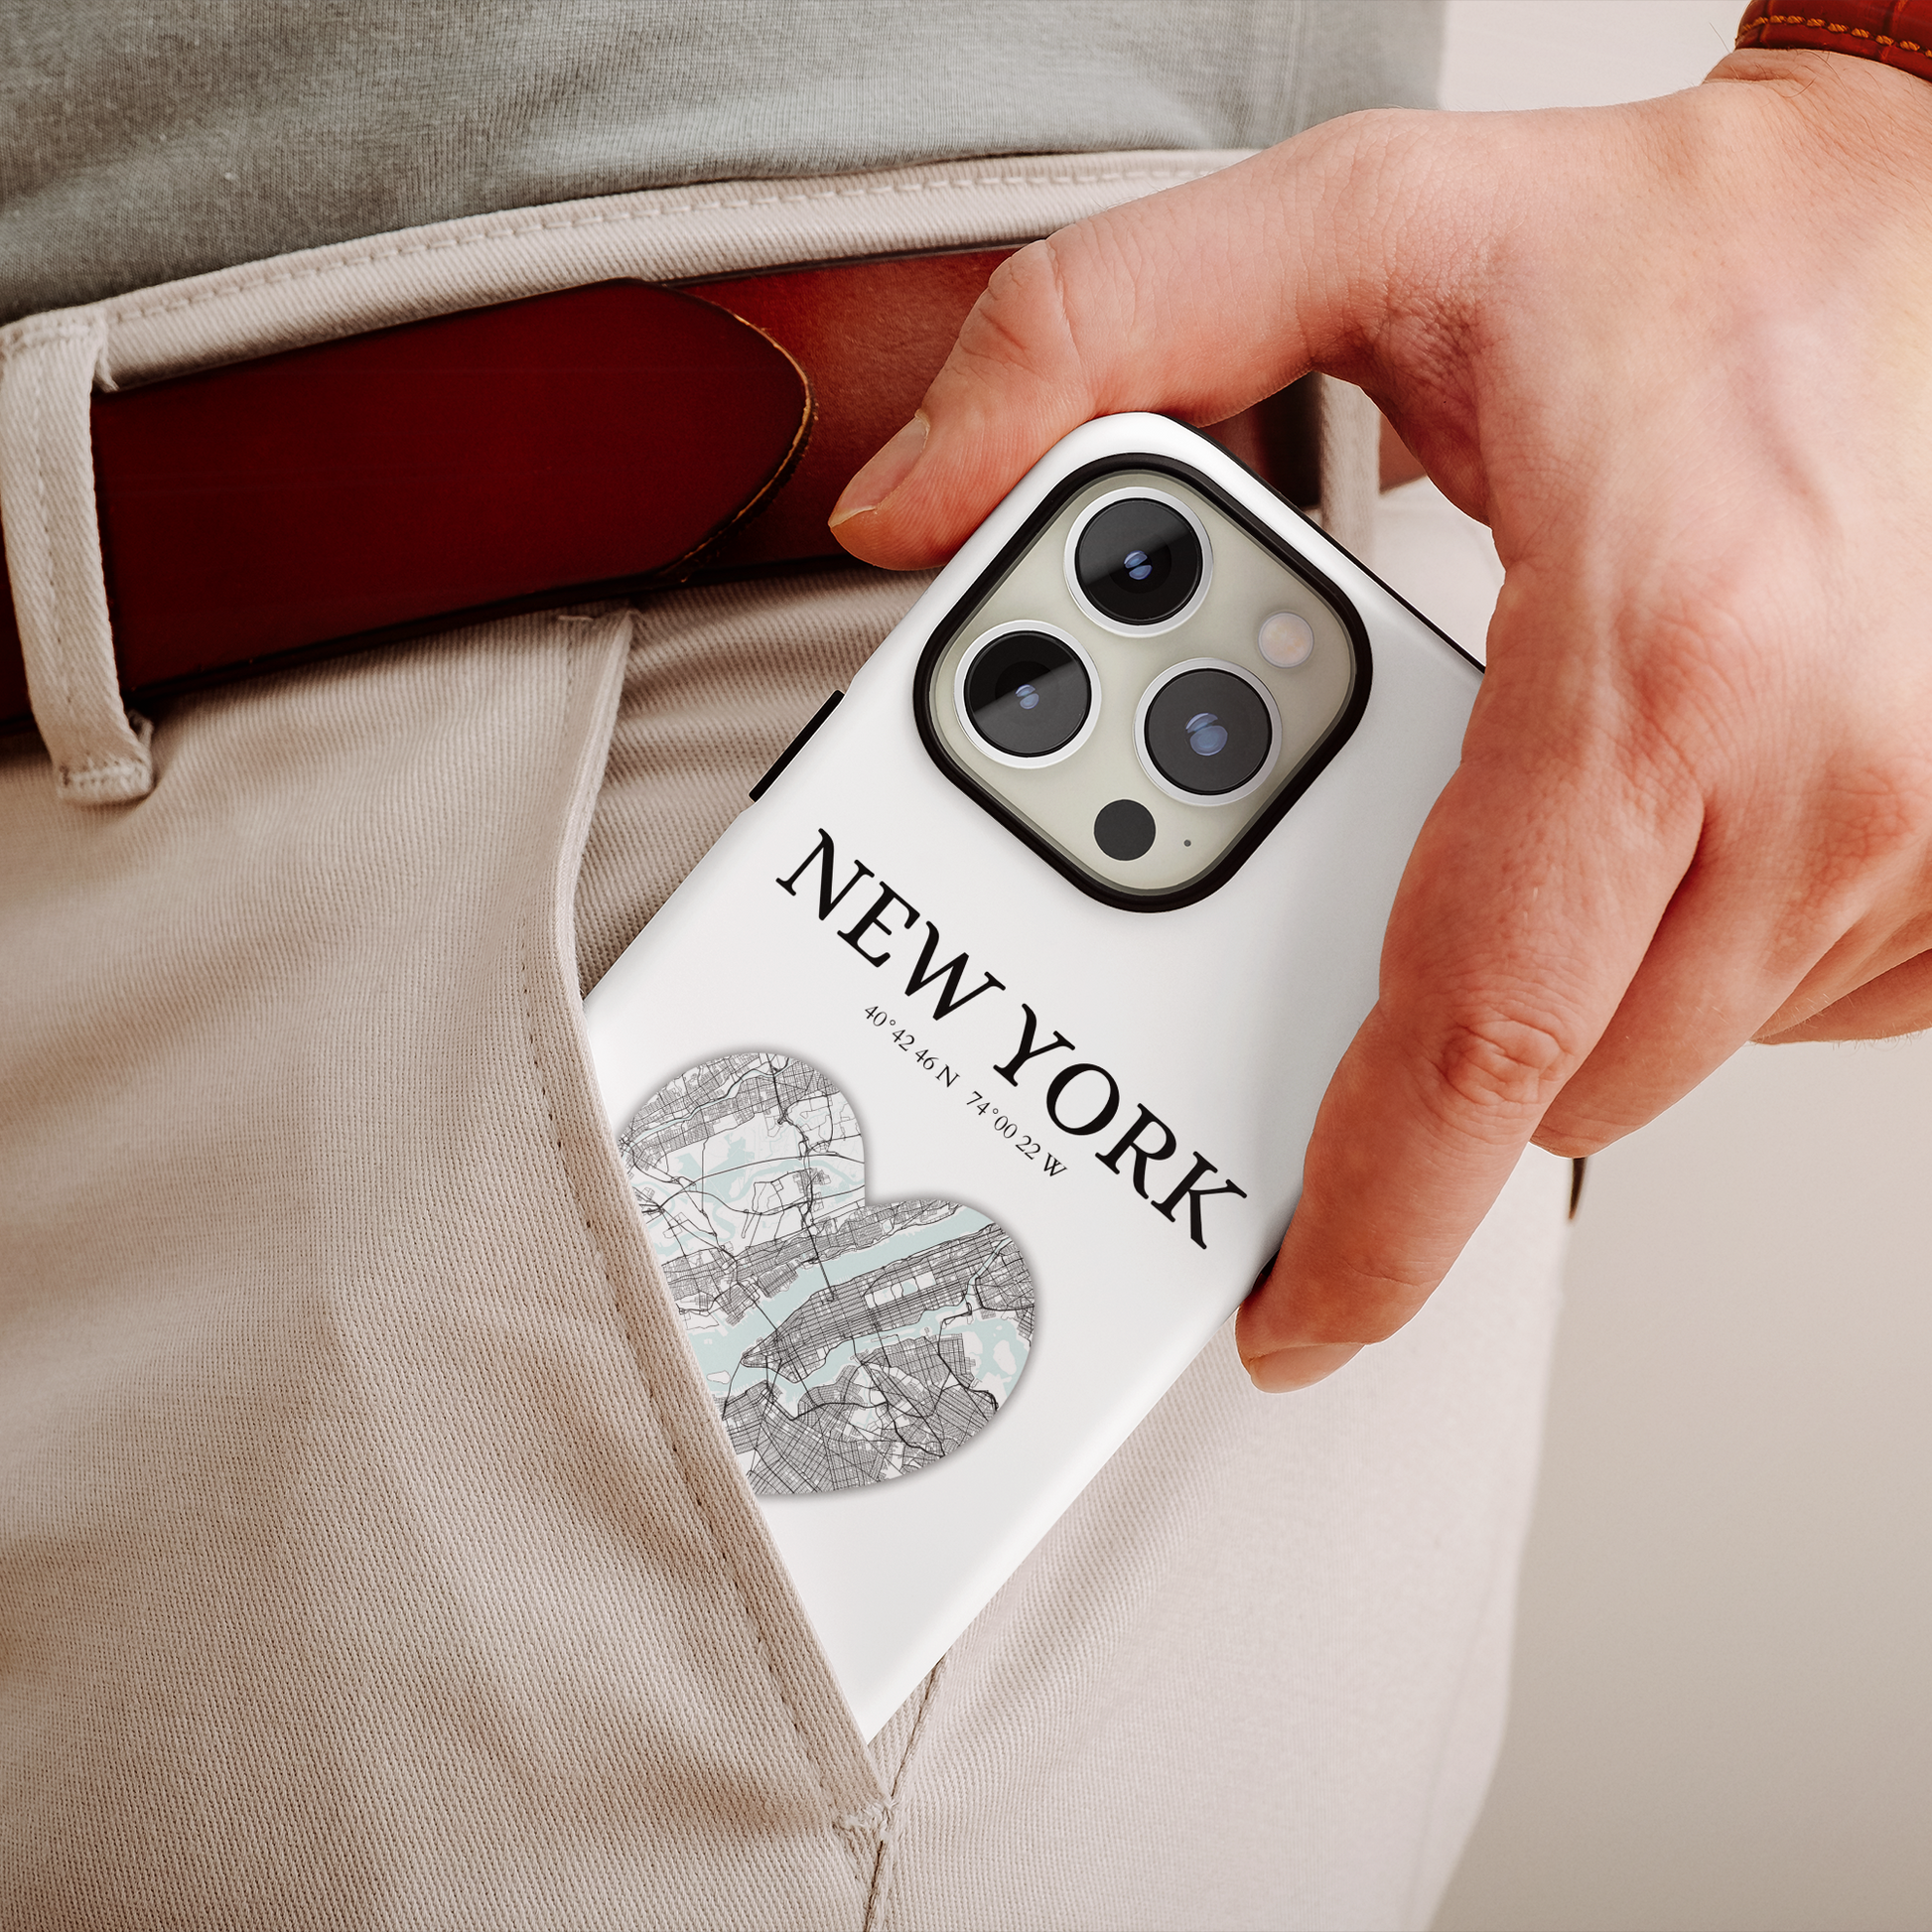 Elevate your iPhone with RimaGallery's New York Heartbeat case. Sleek design meets durability for stylish protection. Free US shipping.-York Heartbeat - White (iPhone Case 11-15)